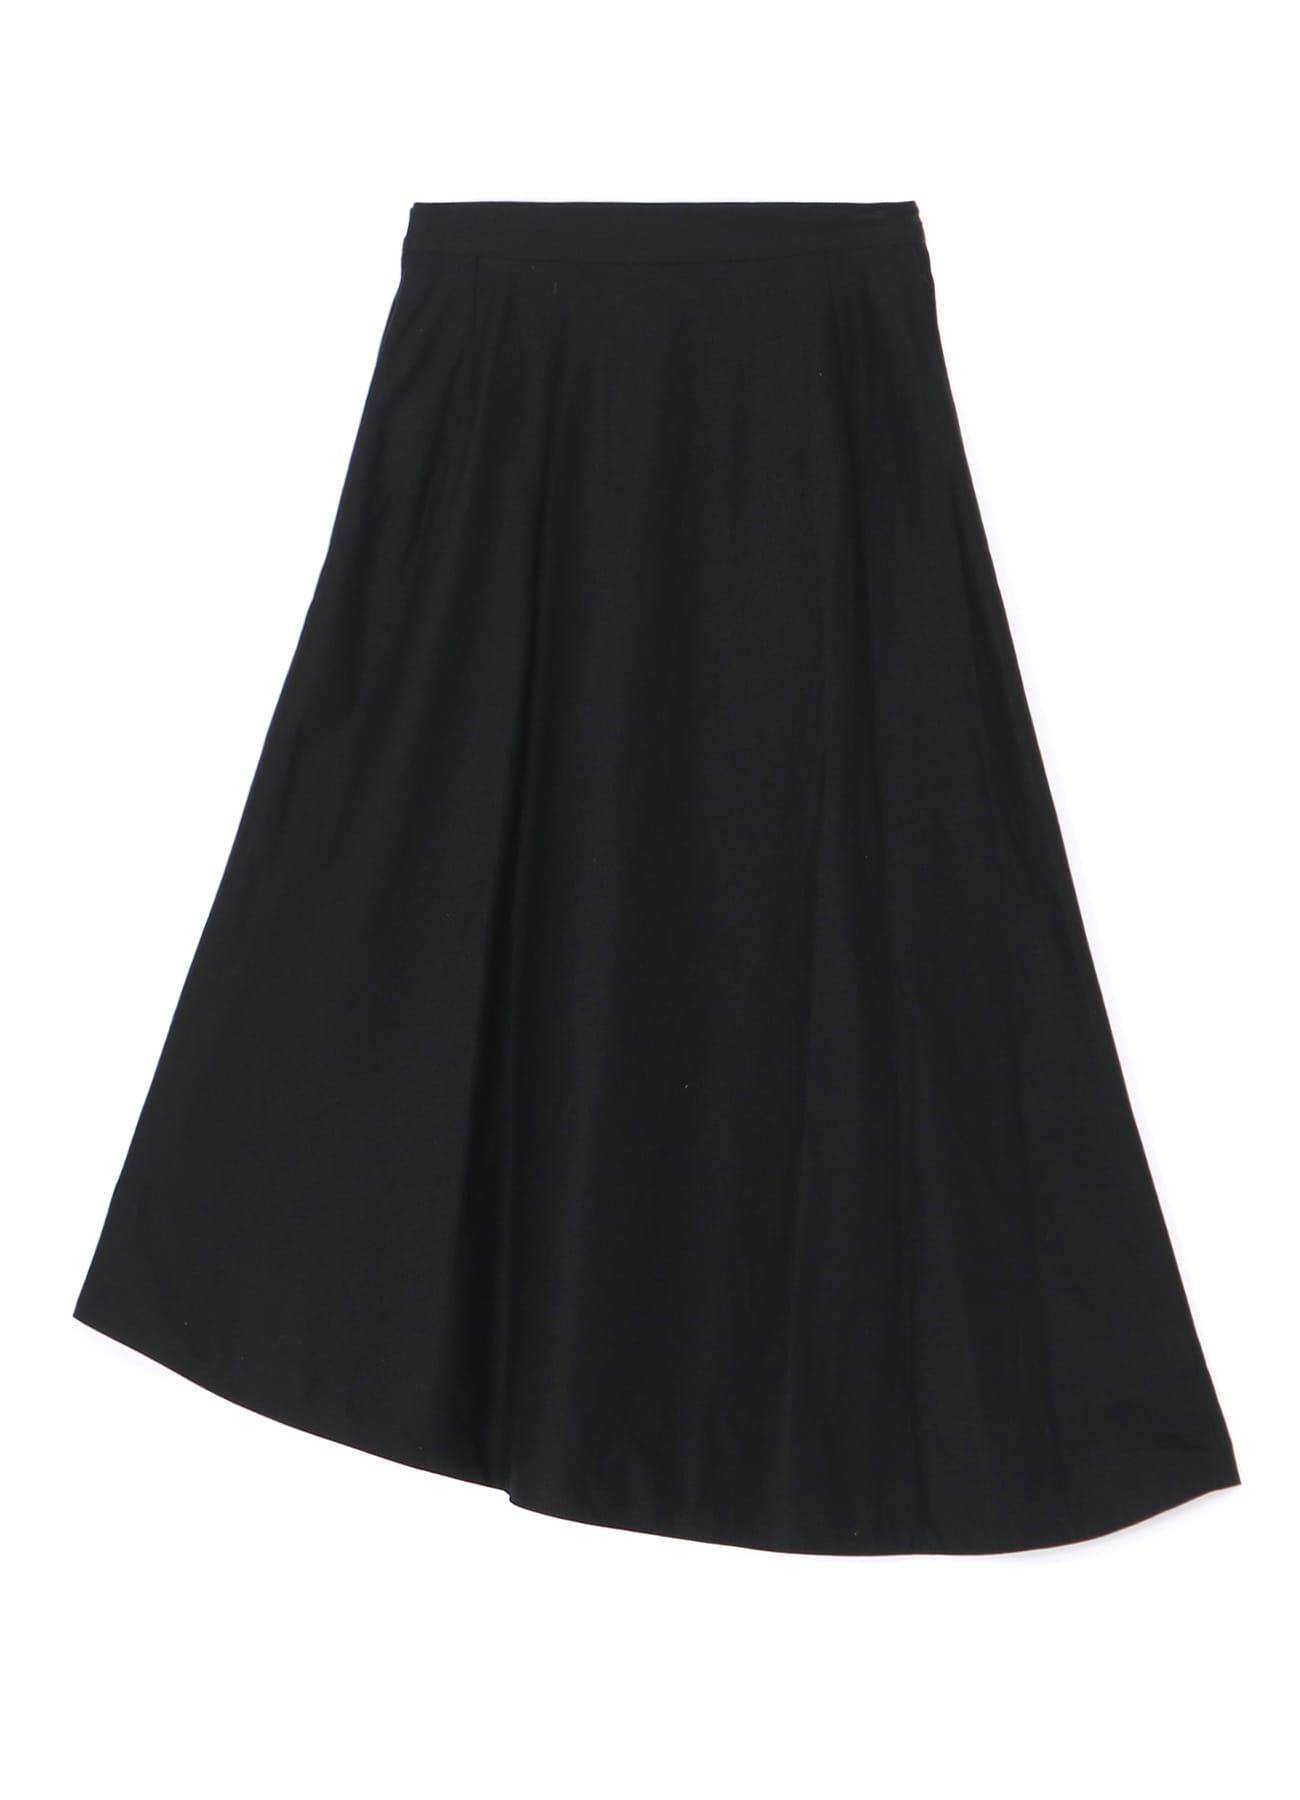 SKIRT WITH BOX PLEATS